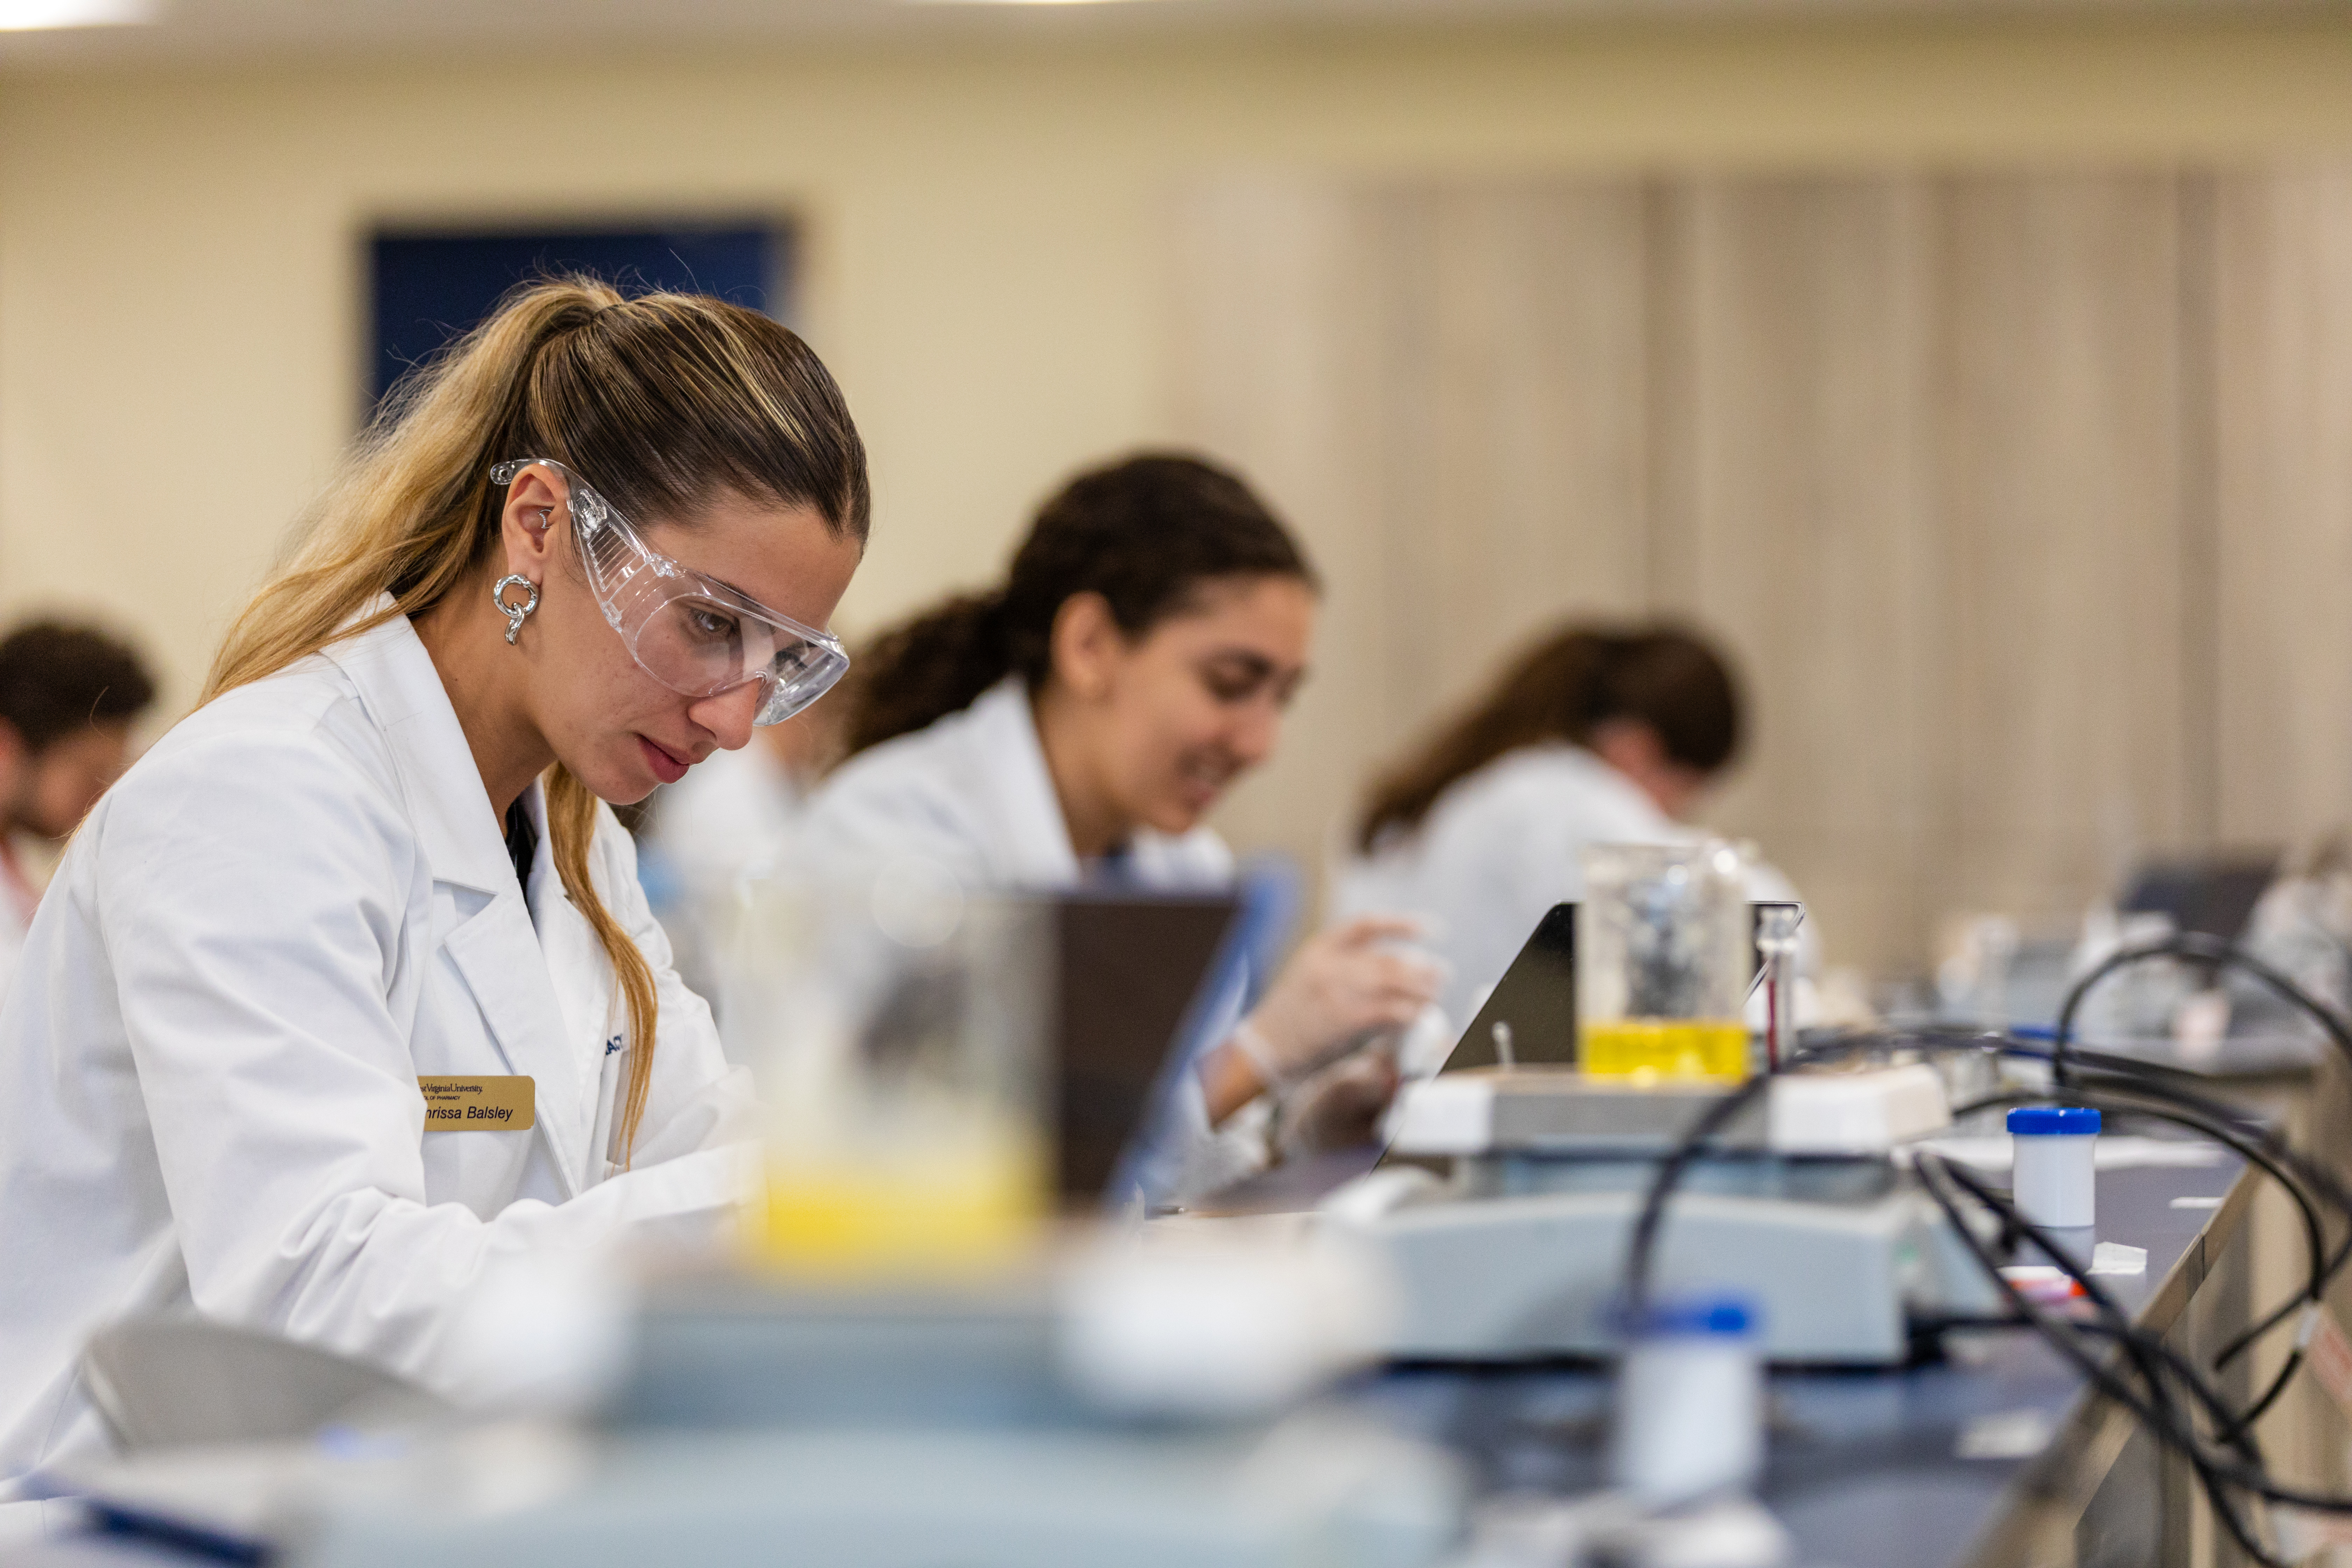 Today's pharmacy students work and learn in high-tech environments.